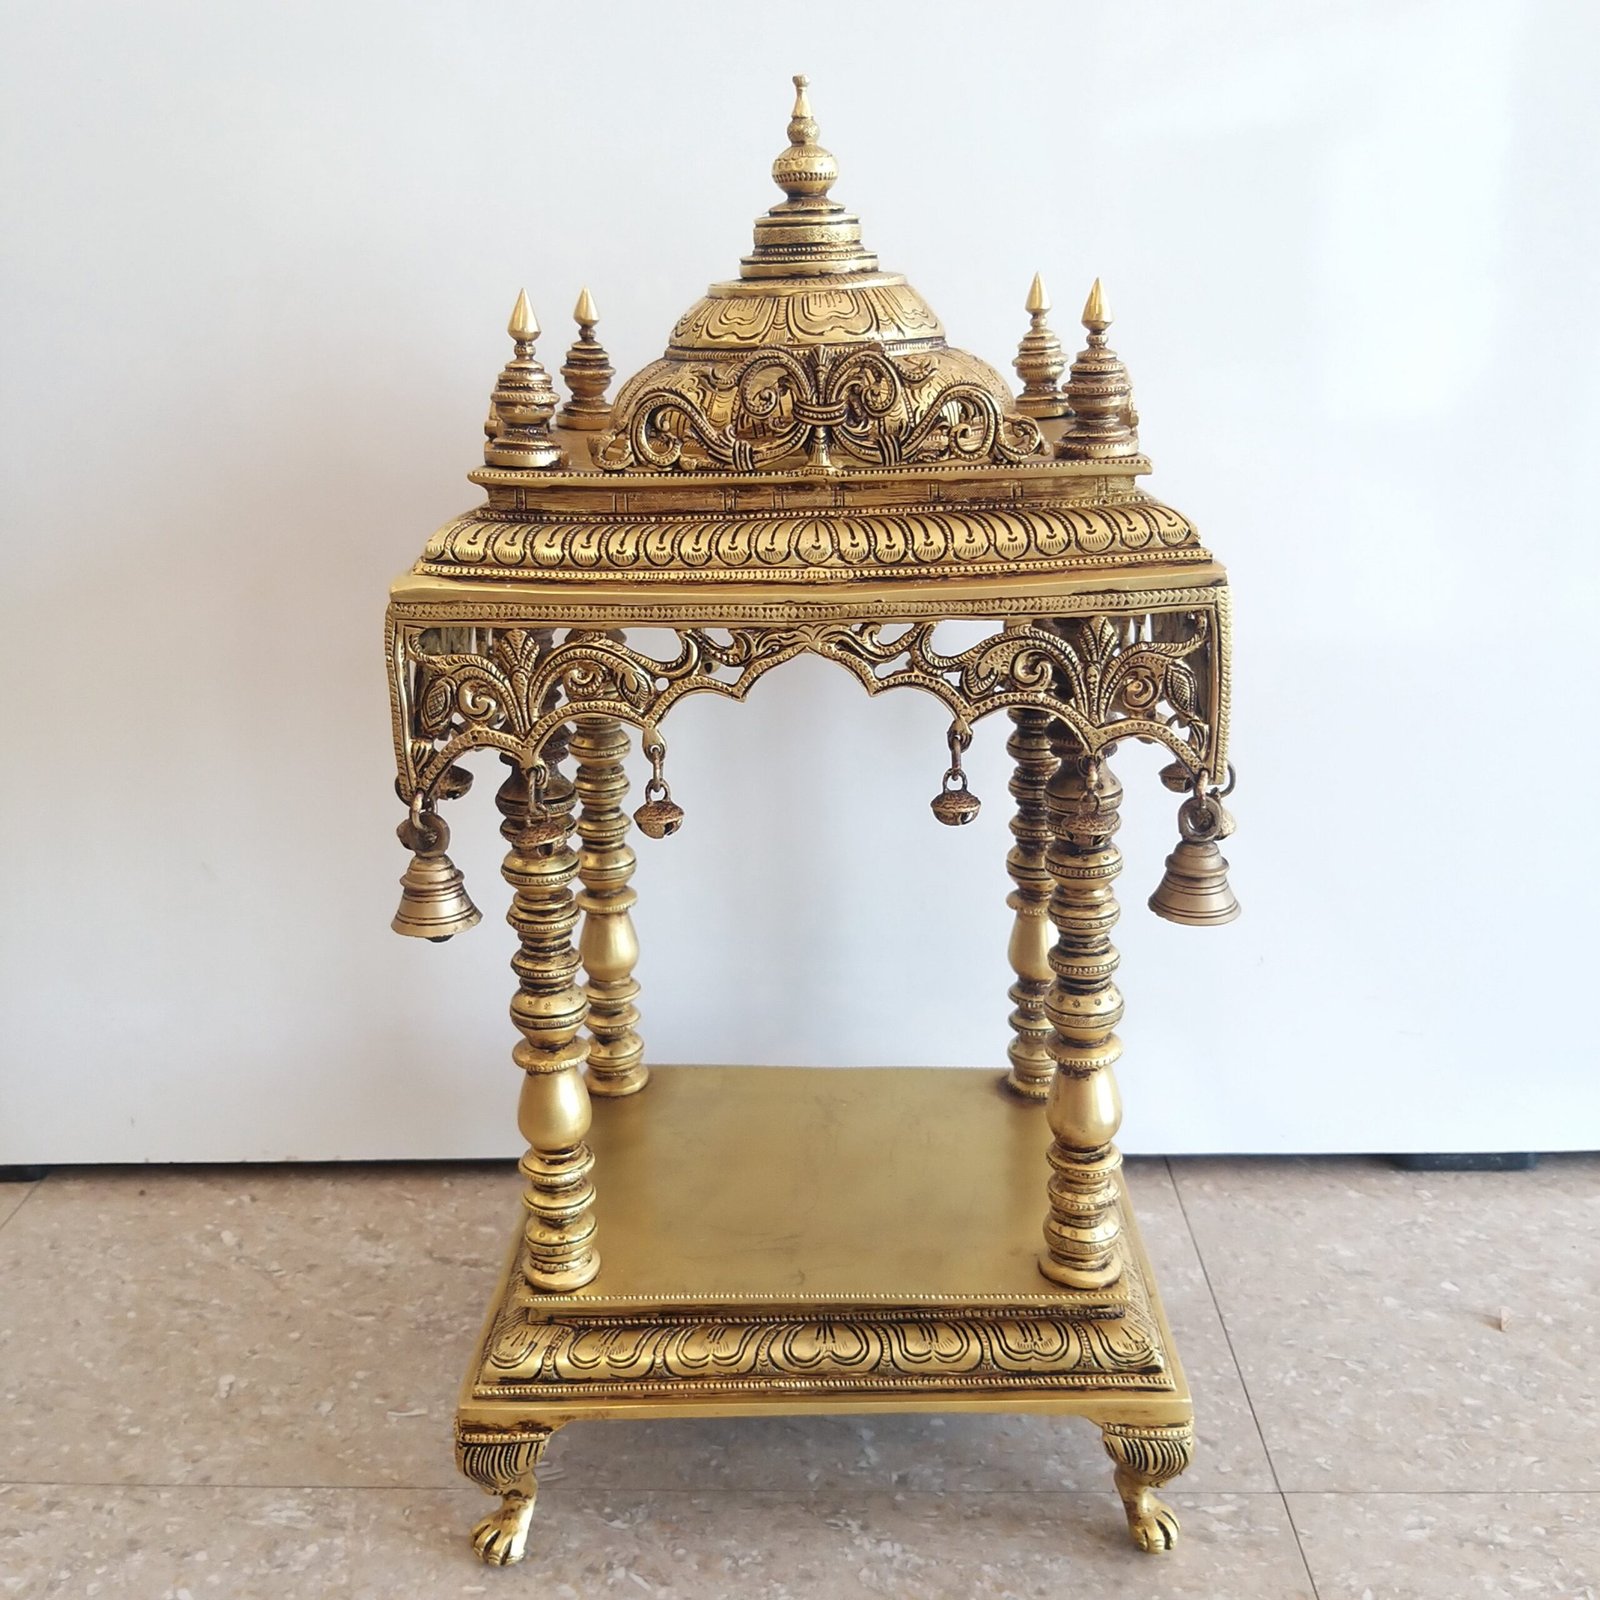 Brass Handcrafted Temple with Bell Idol (POOJA MANDIR)- 21